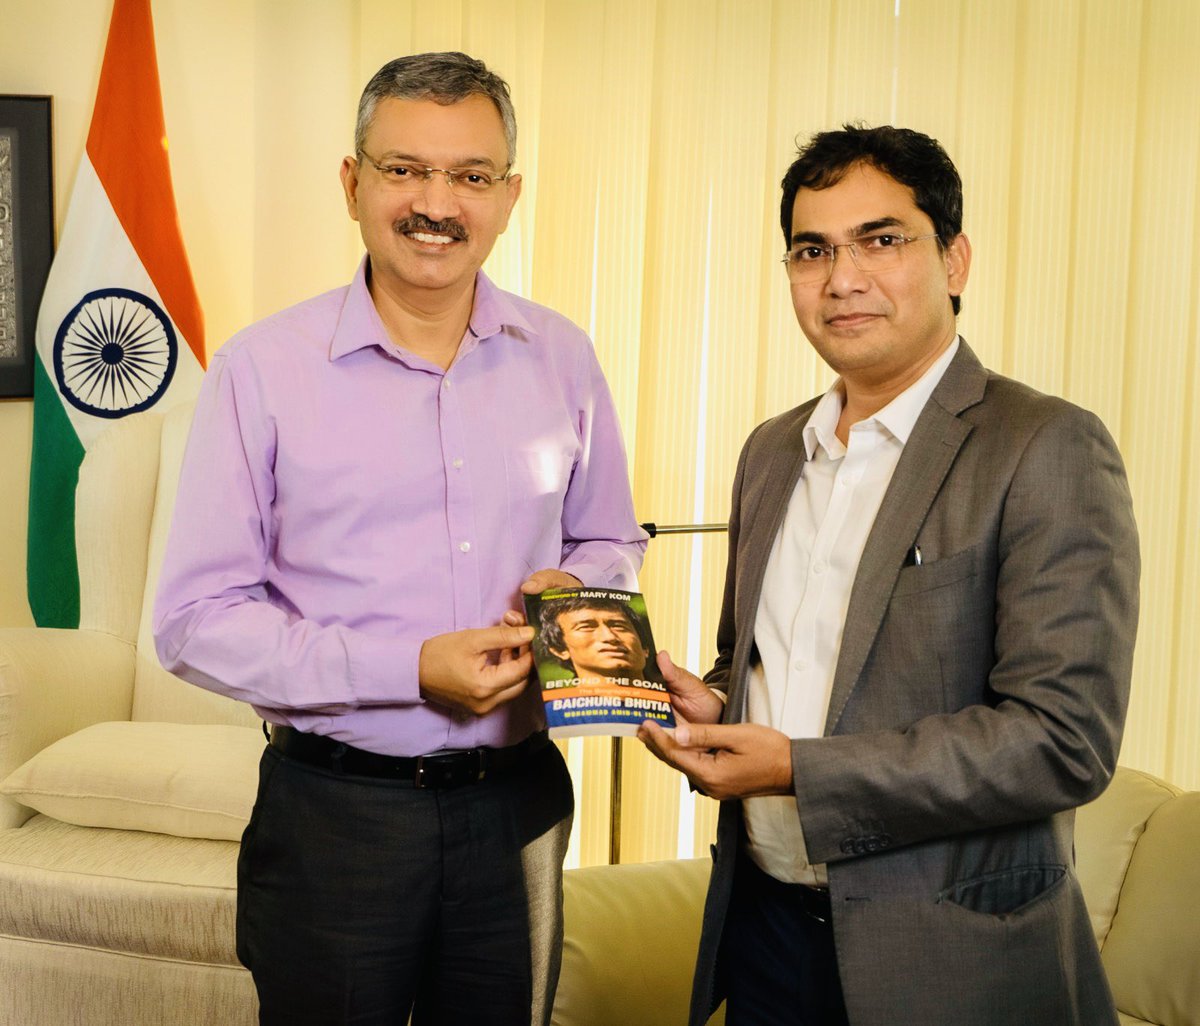 It was an honour to present my book ‘Beyond the Goal’ to 🇮🇳Indian Ambassador to 🇶🇦Qatar, HE Dr Deepak Mittal @d_mittal73 at @IndEmbDoha today.

#football #india #qatar2022 #IndianFootball